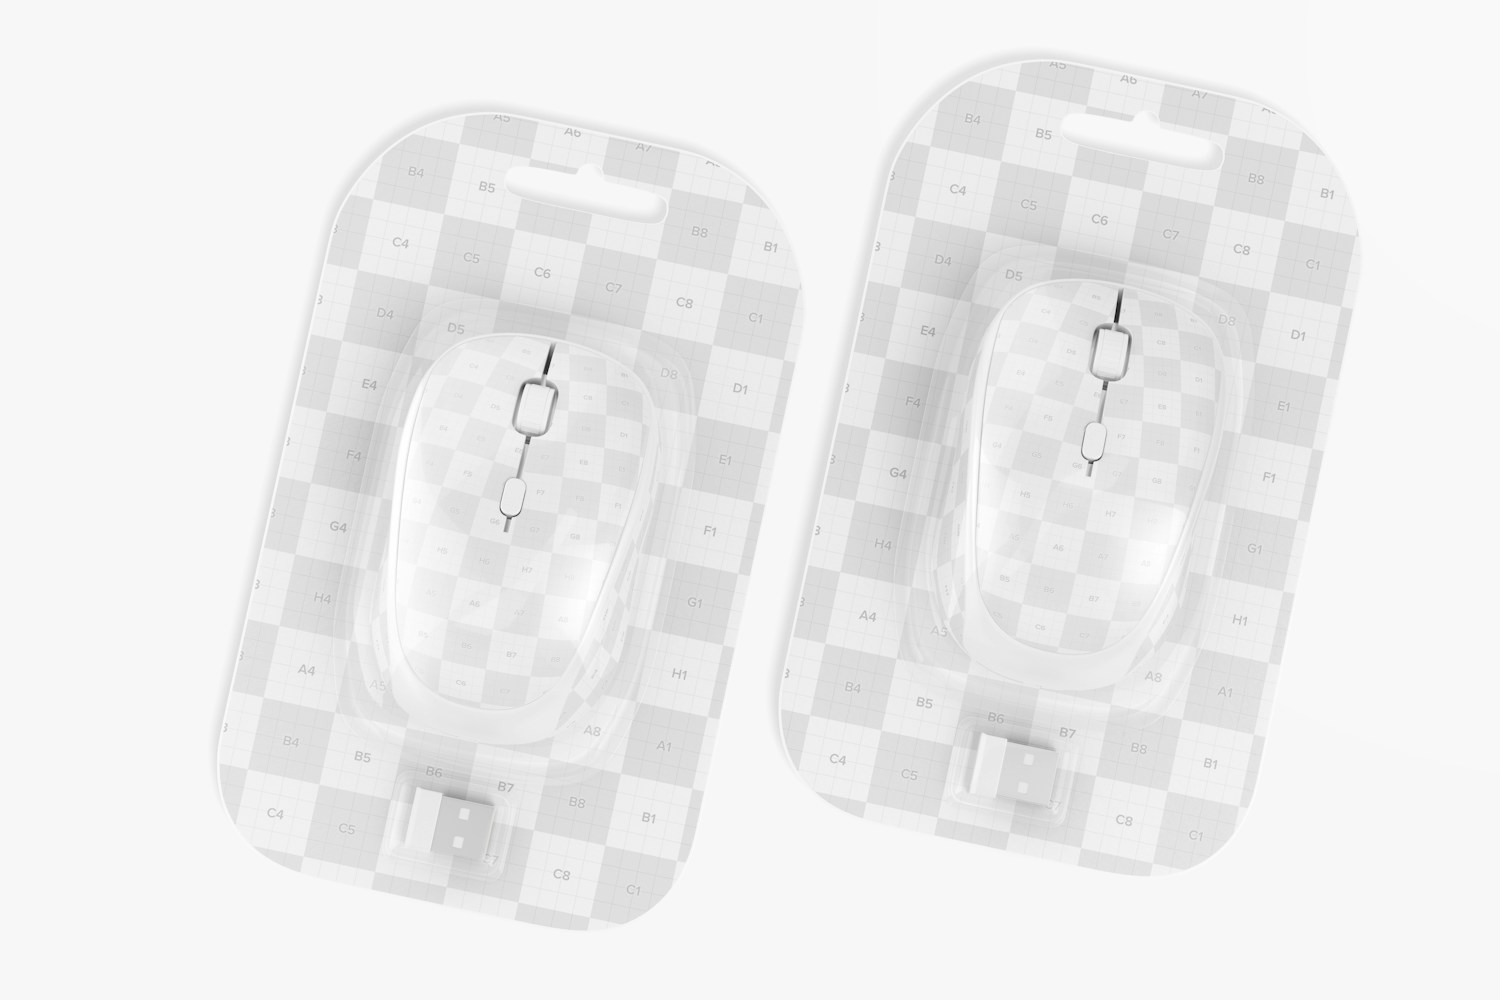 Wireless Mouse Blister Mockup, Top View